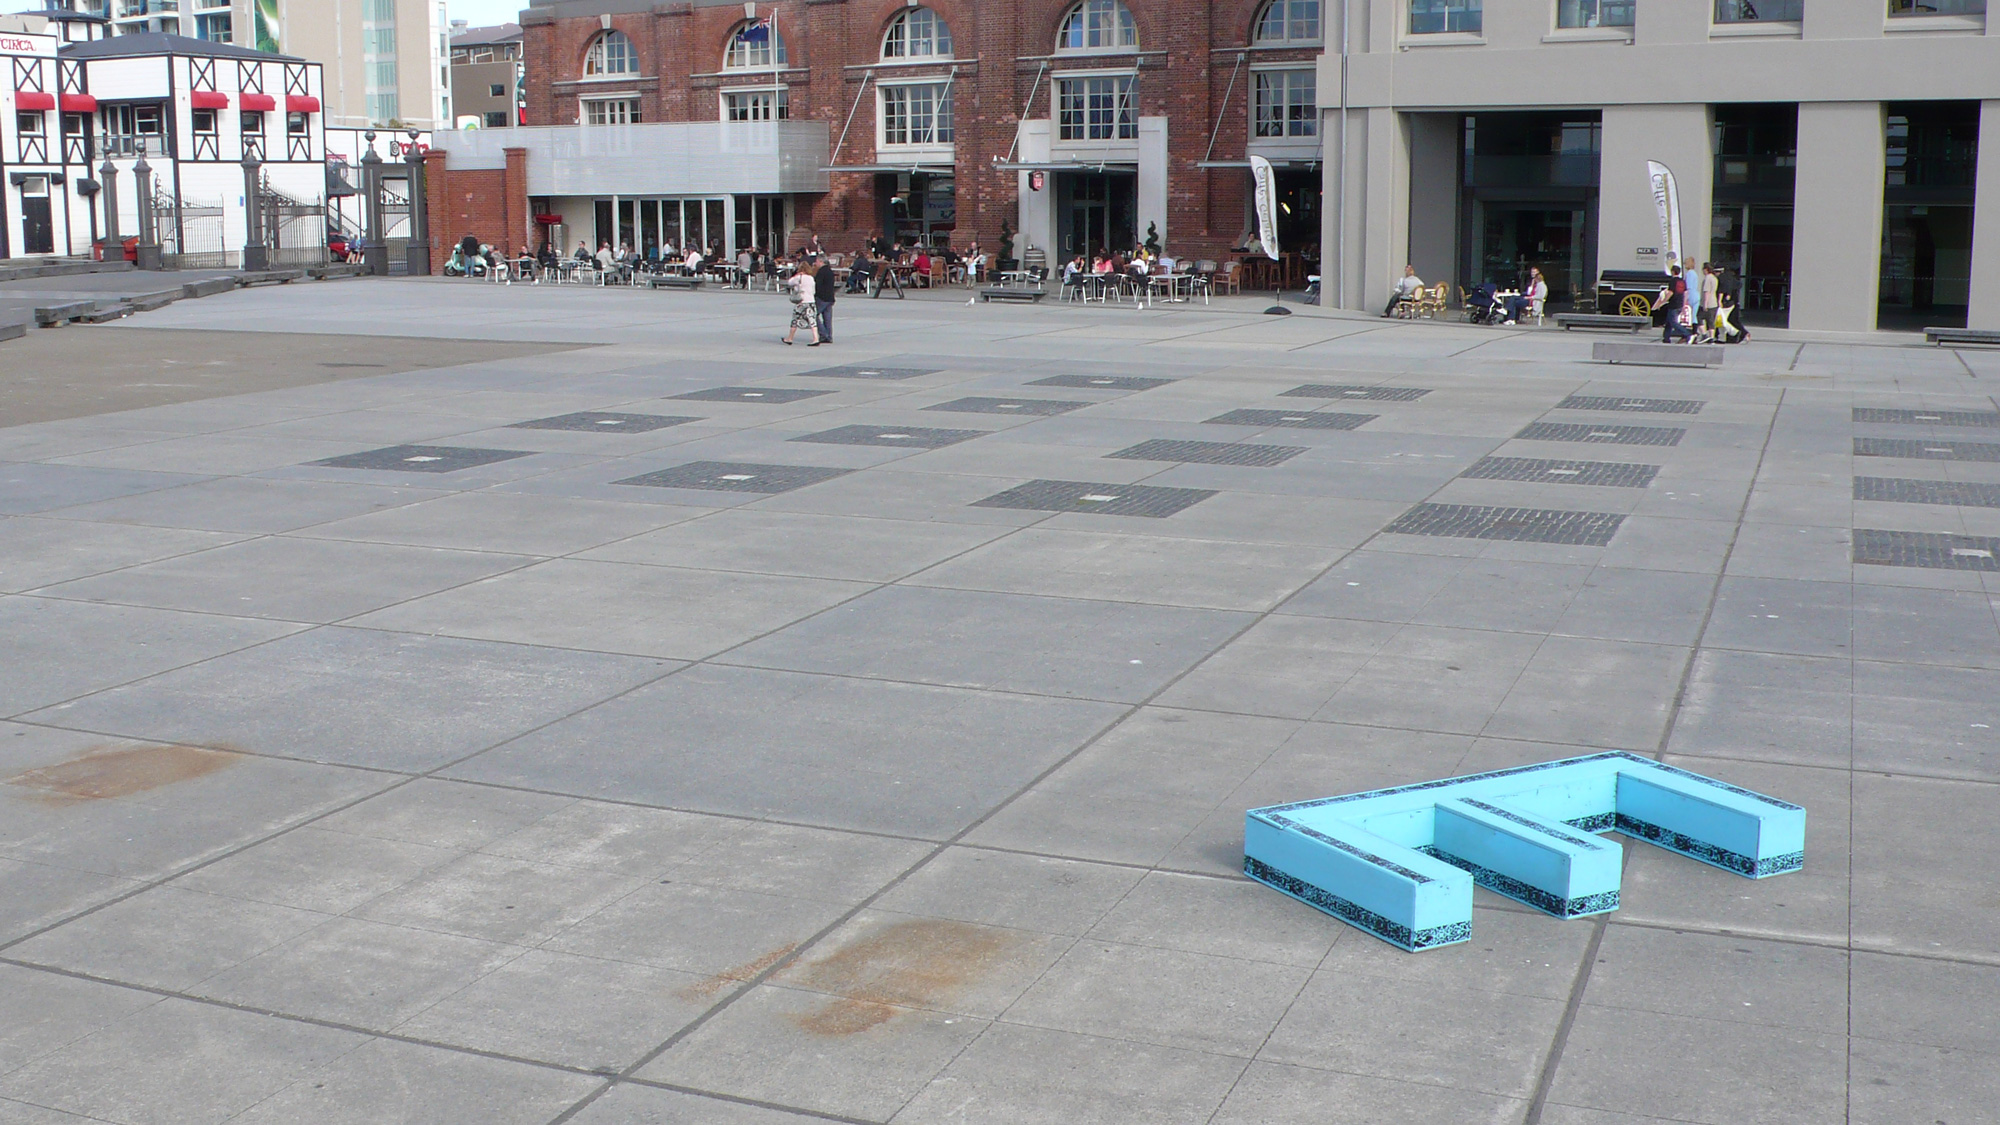 An E-shaped skateboard obstacle at Wellington's Odlins Plaza (AKA The Brewery).